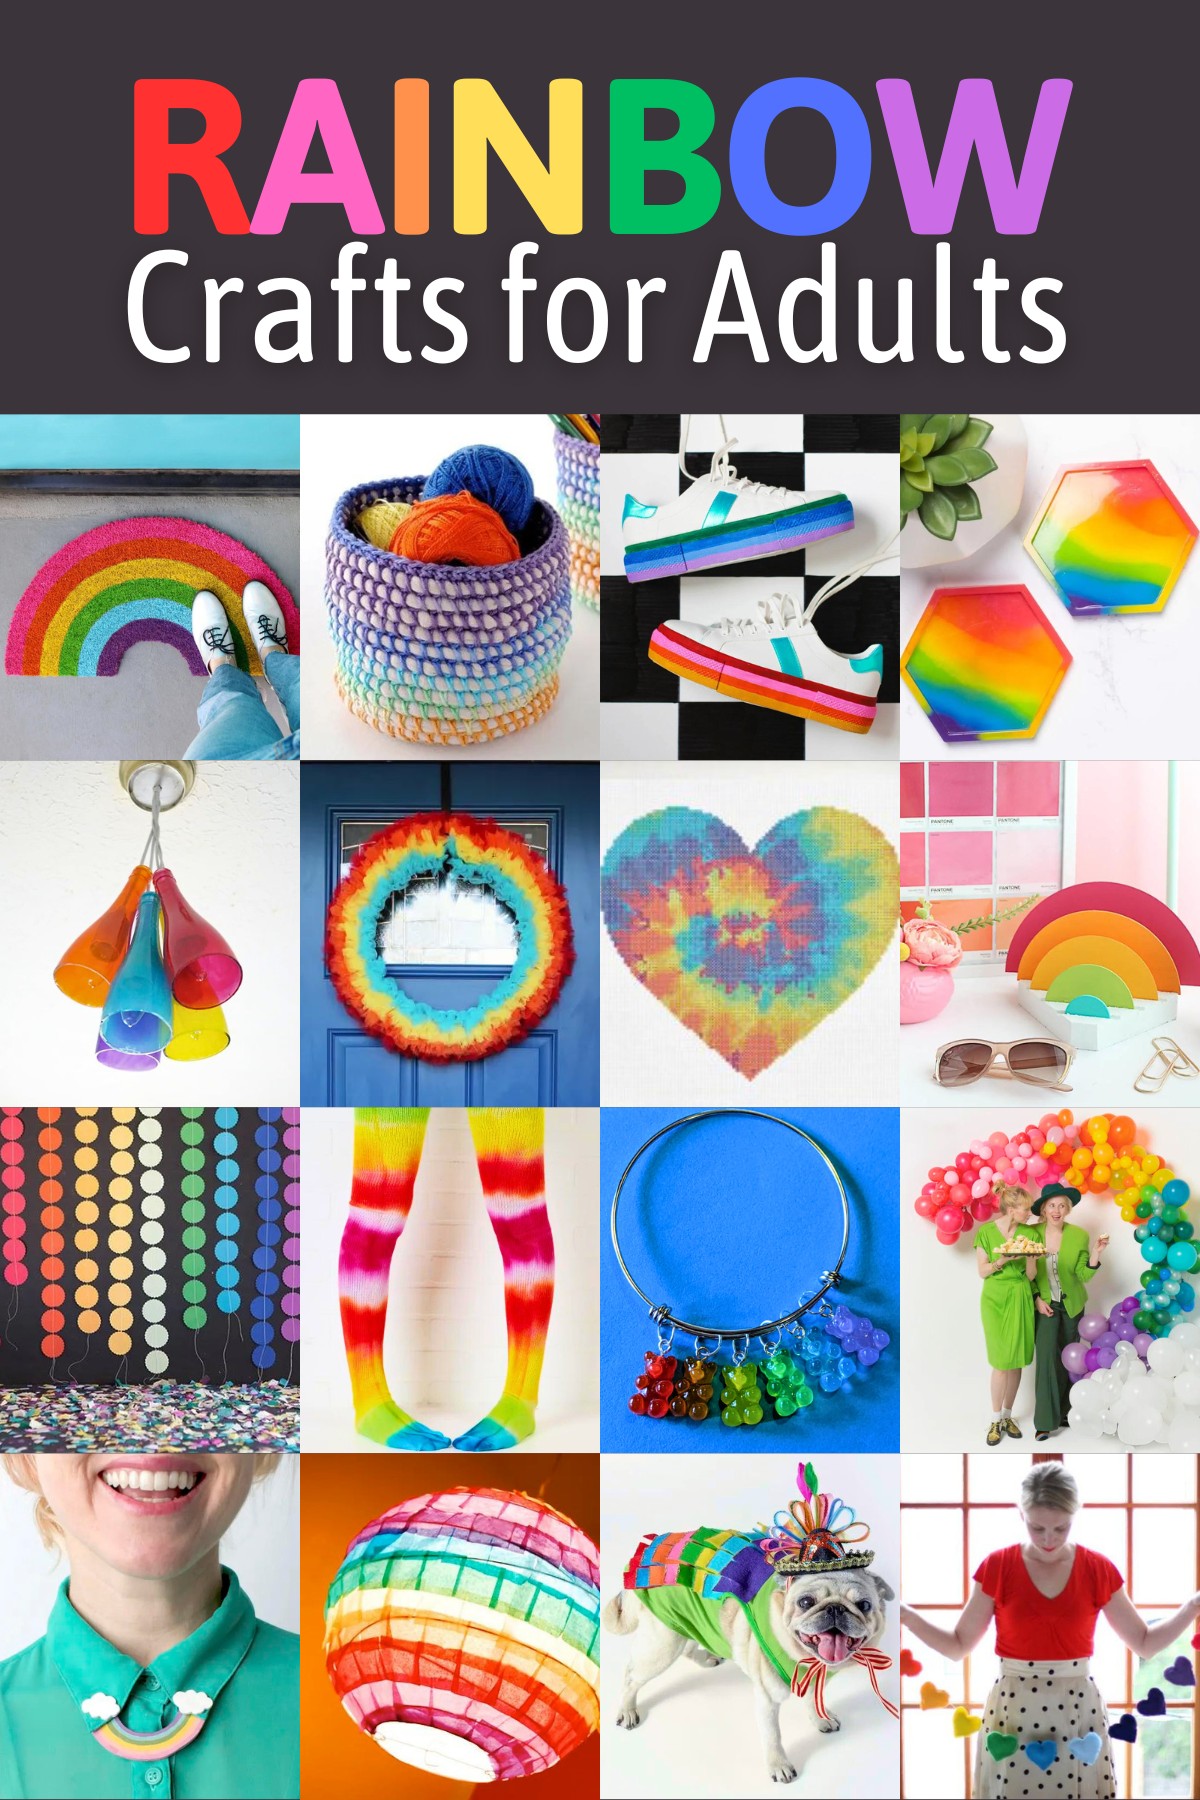 Rainbow Crafts for Adults